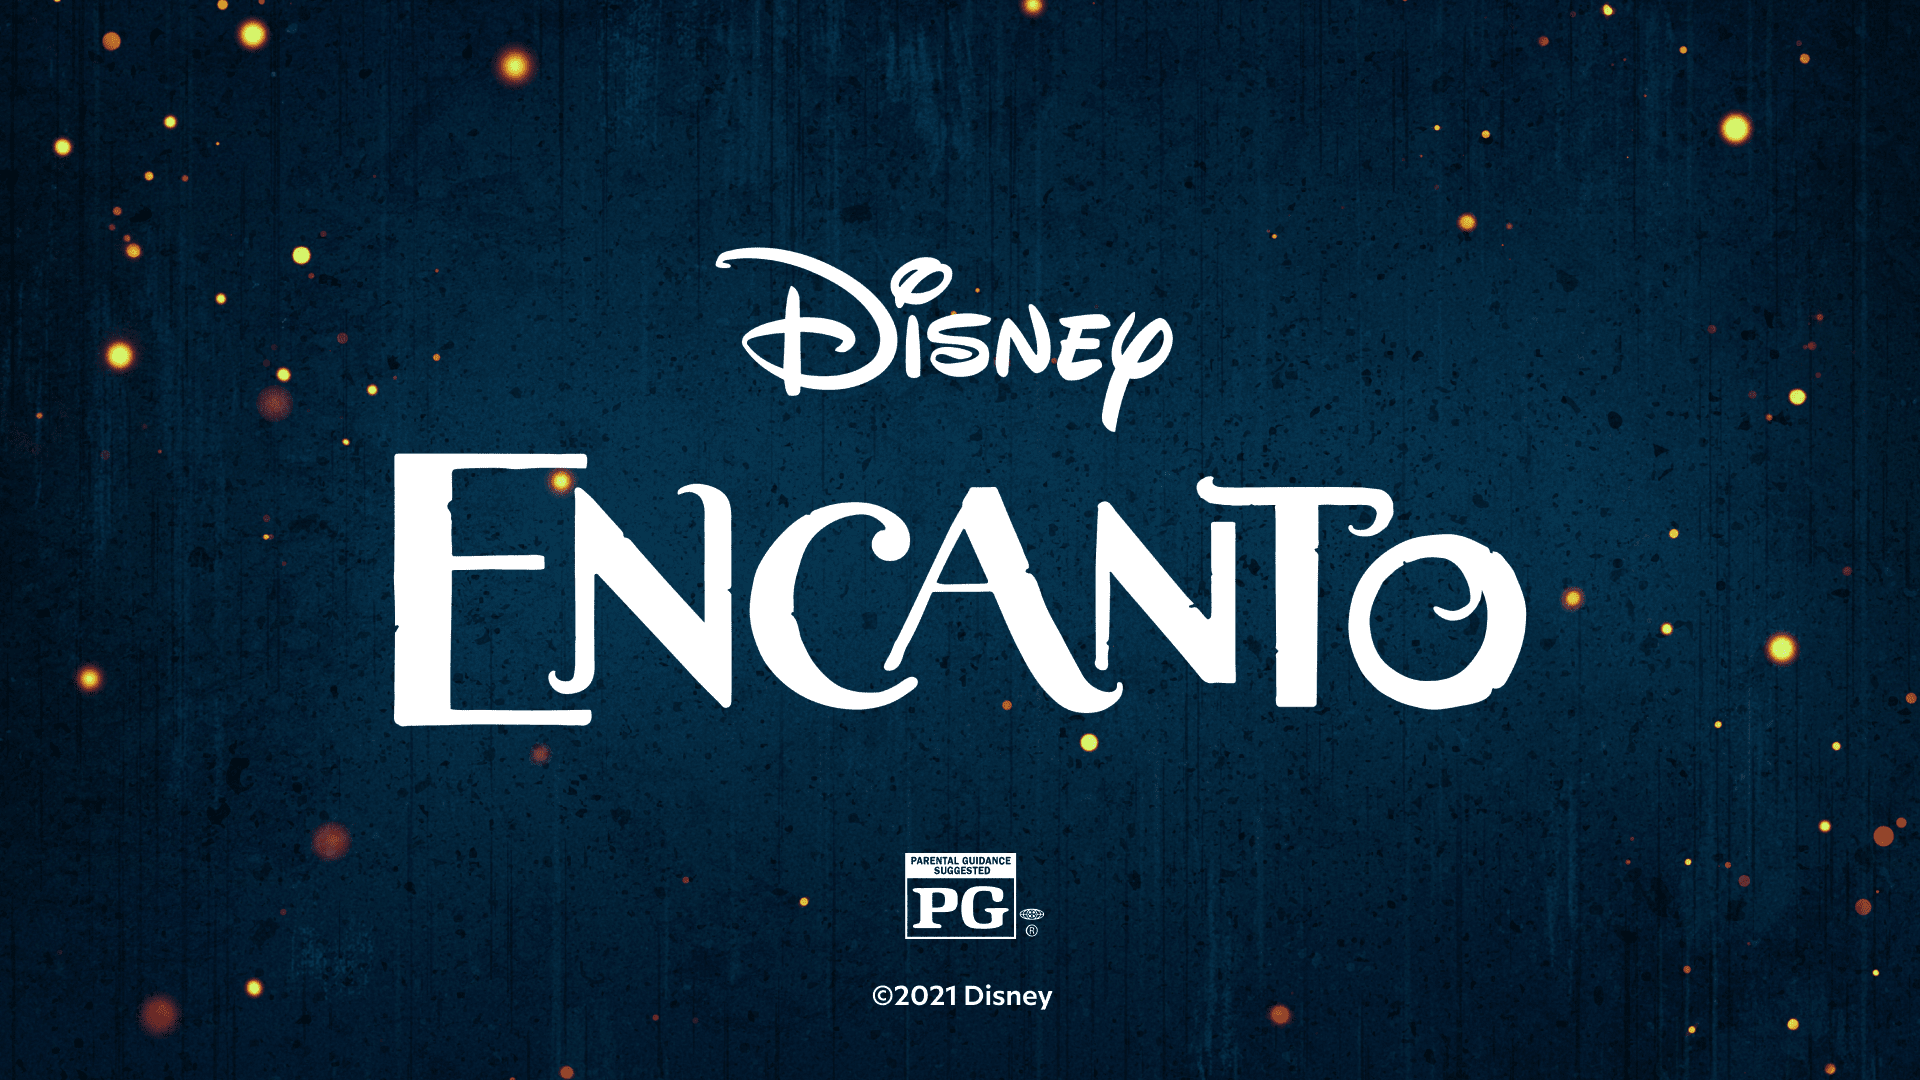 Babbel and Disney Team Up to Celebrate the Release of Disney’s "Encanto" 